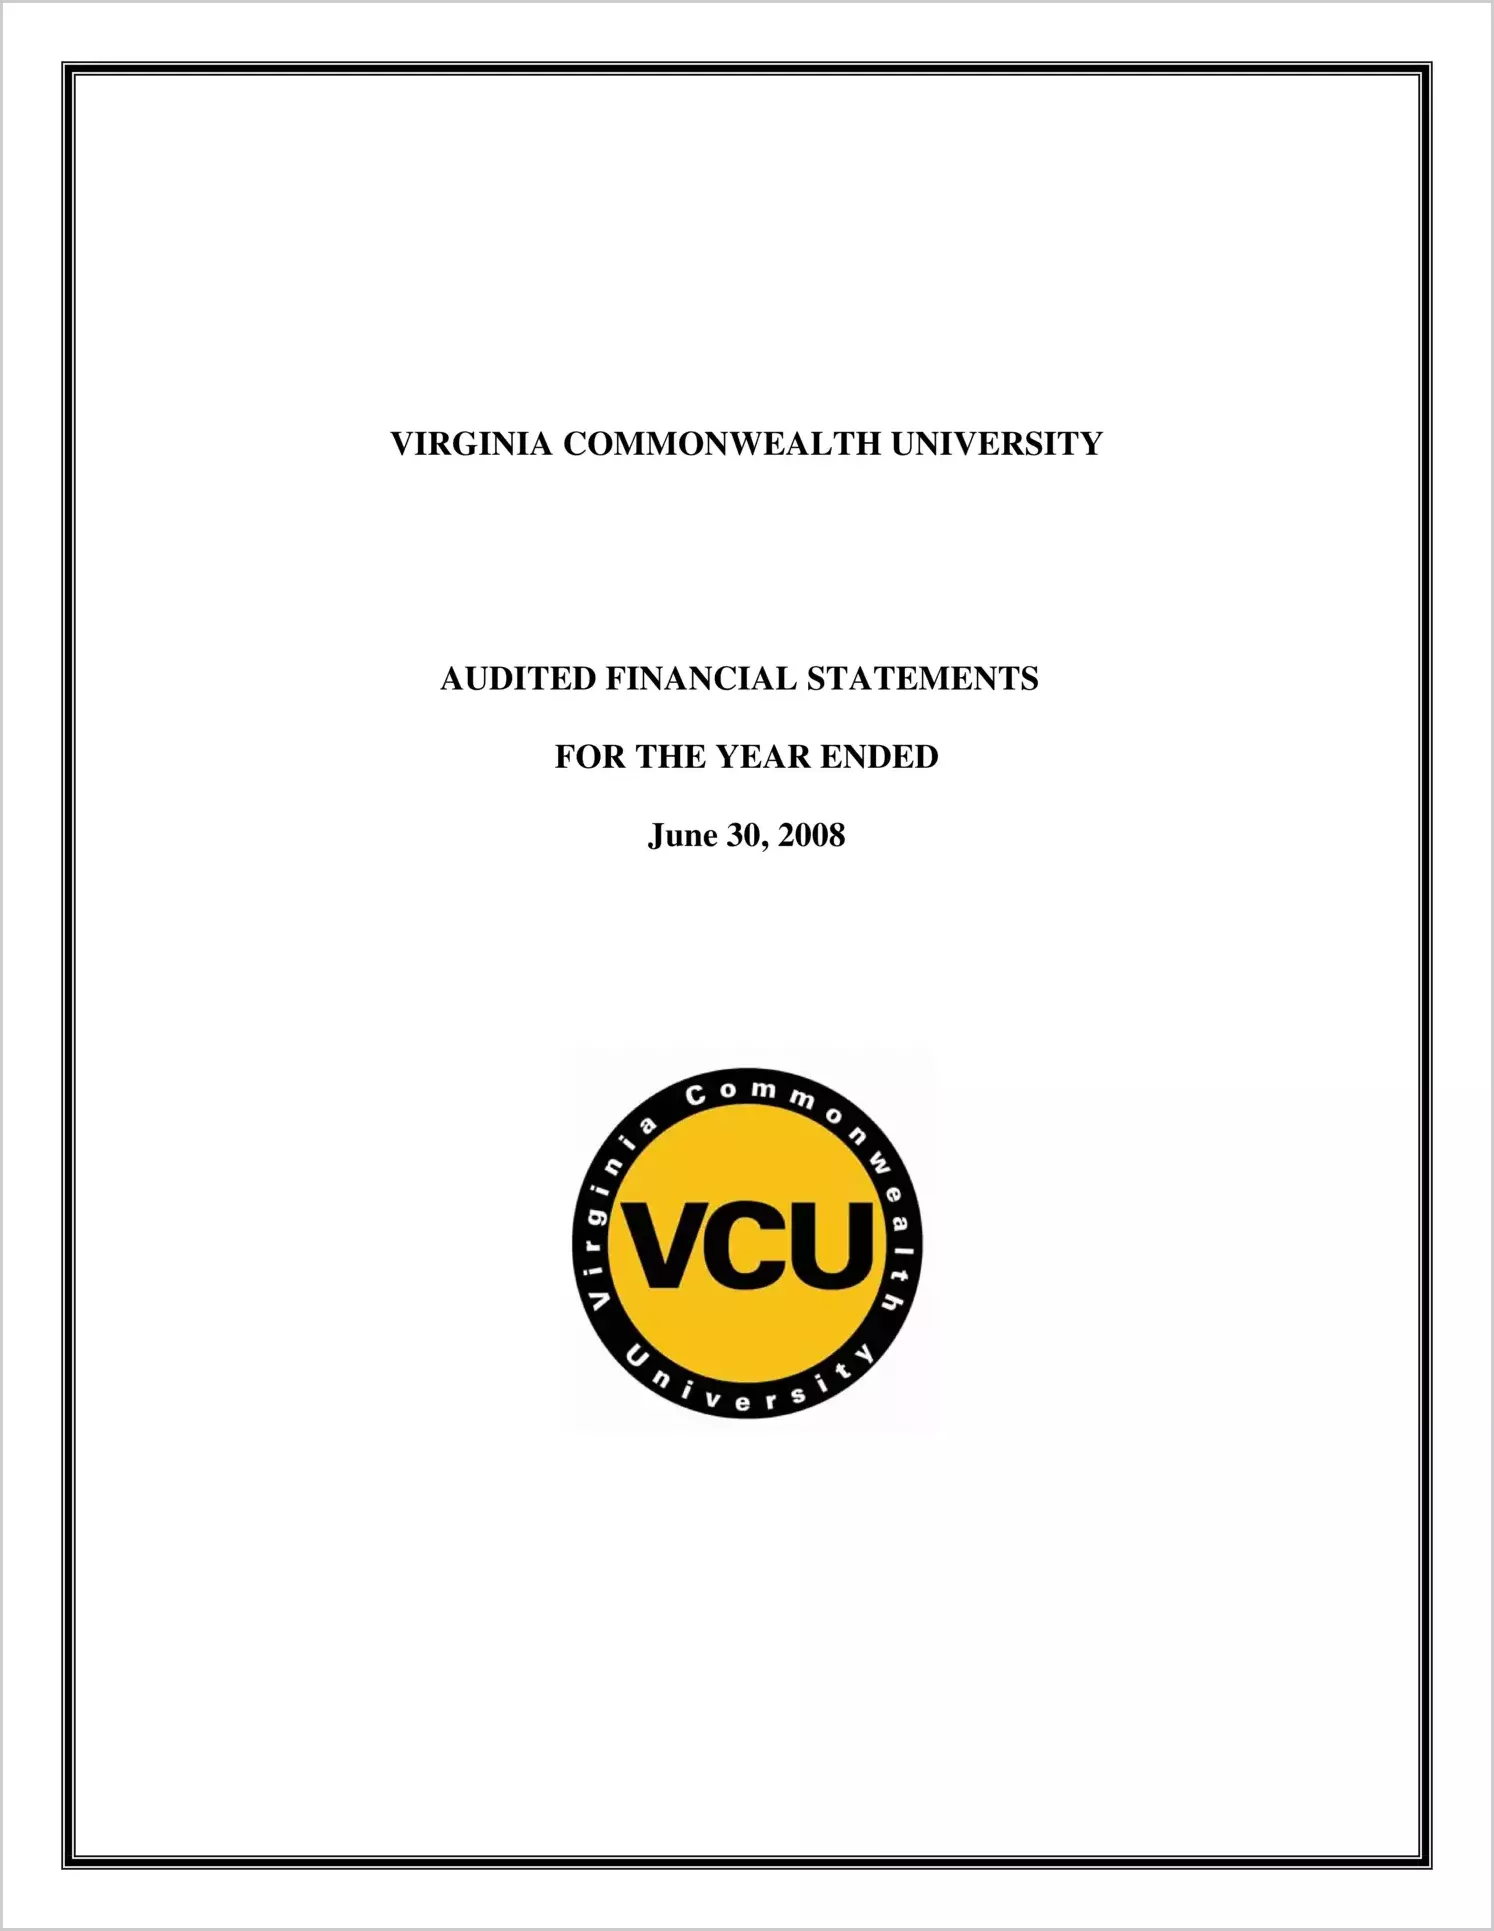 Virginia Commonwealth University Audited Financial Statements for the Year Ended June 30, 2008